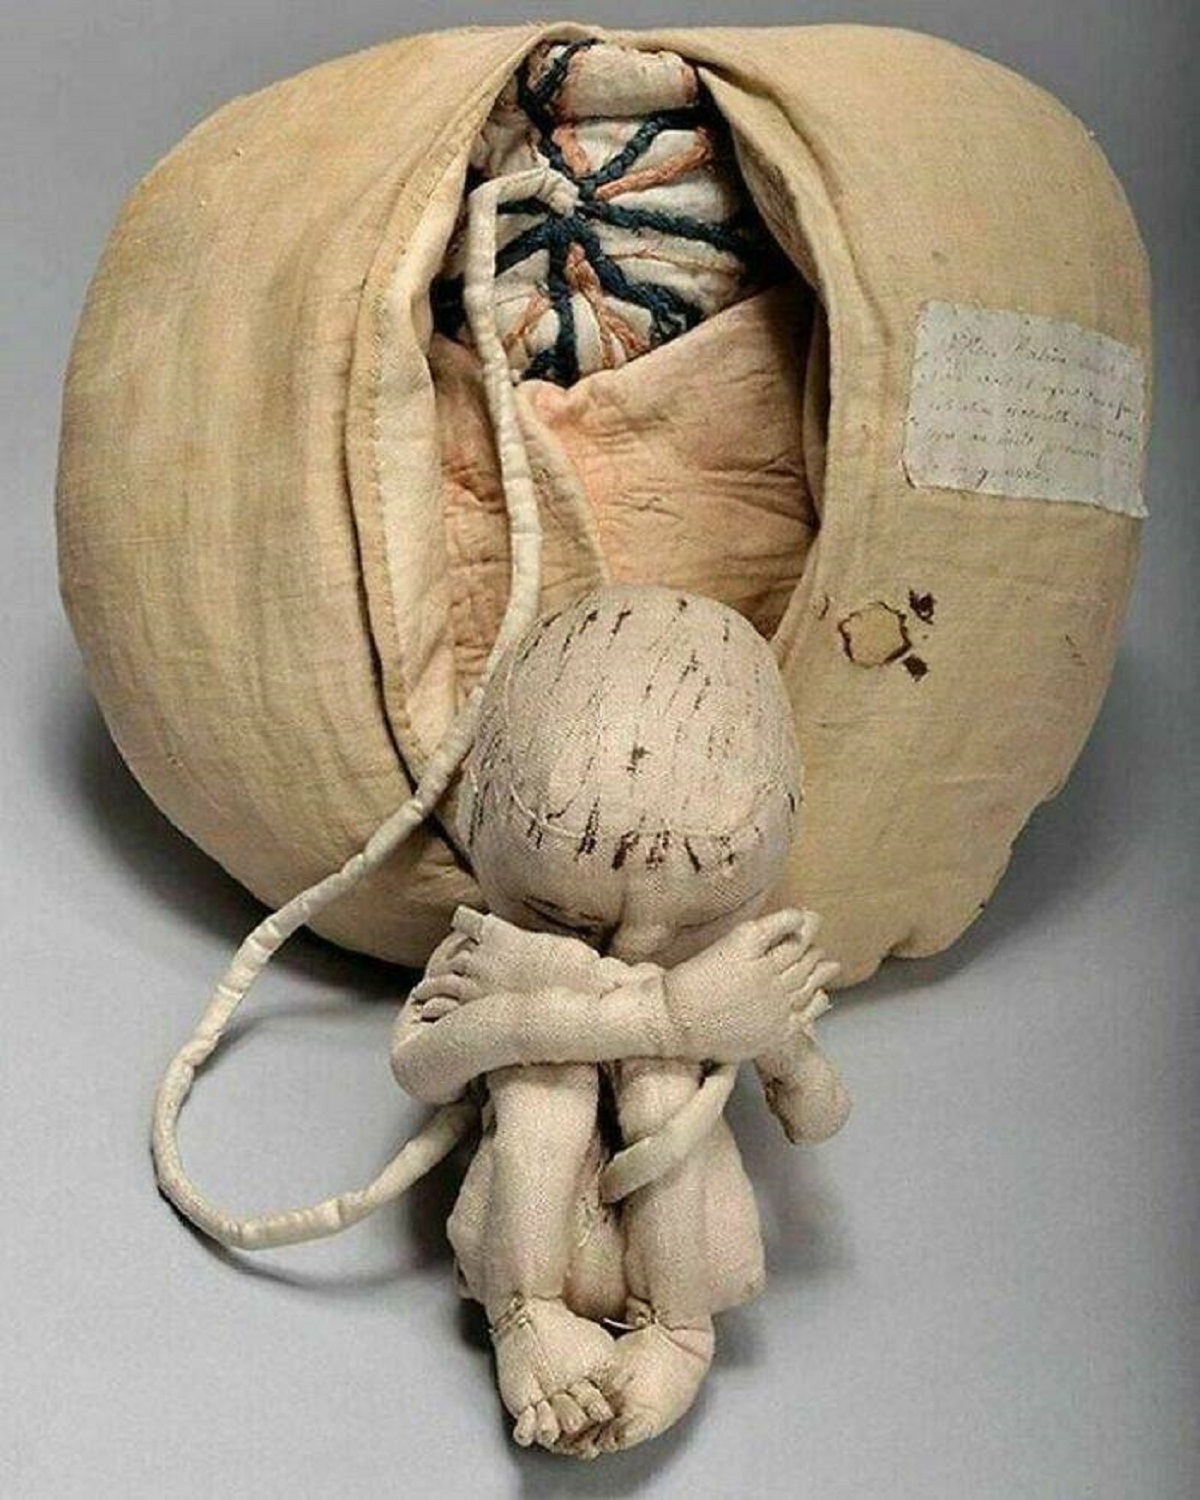 "A Fabric Womb Made By Angélique Du Coudray, A French Midwife Who Was Commissioned By King Louis Xv To Reduce Infant Mortality"